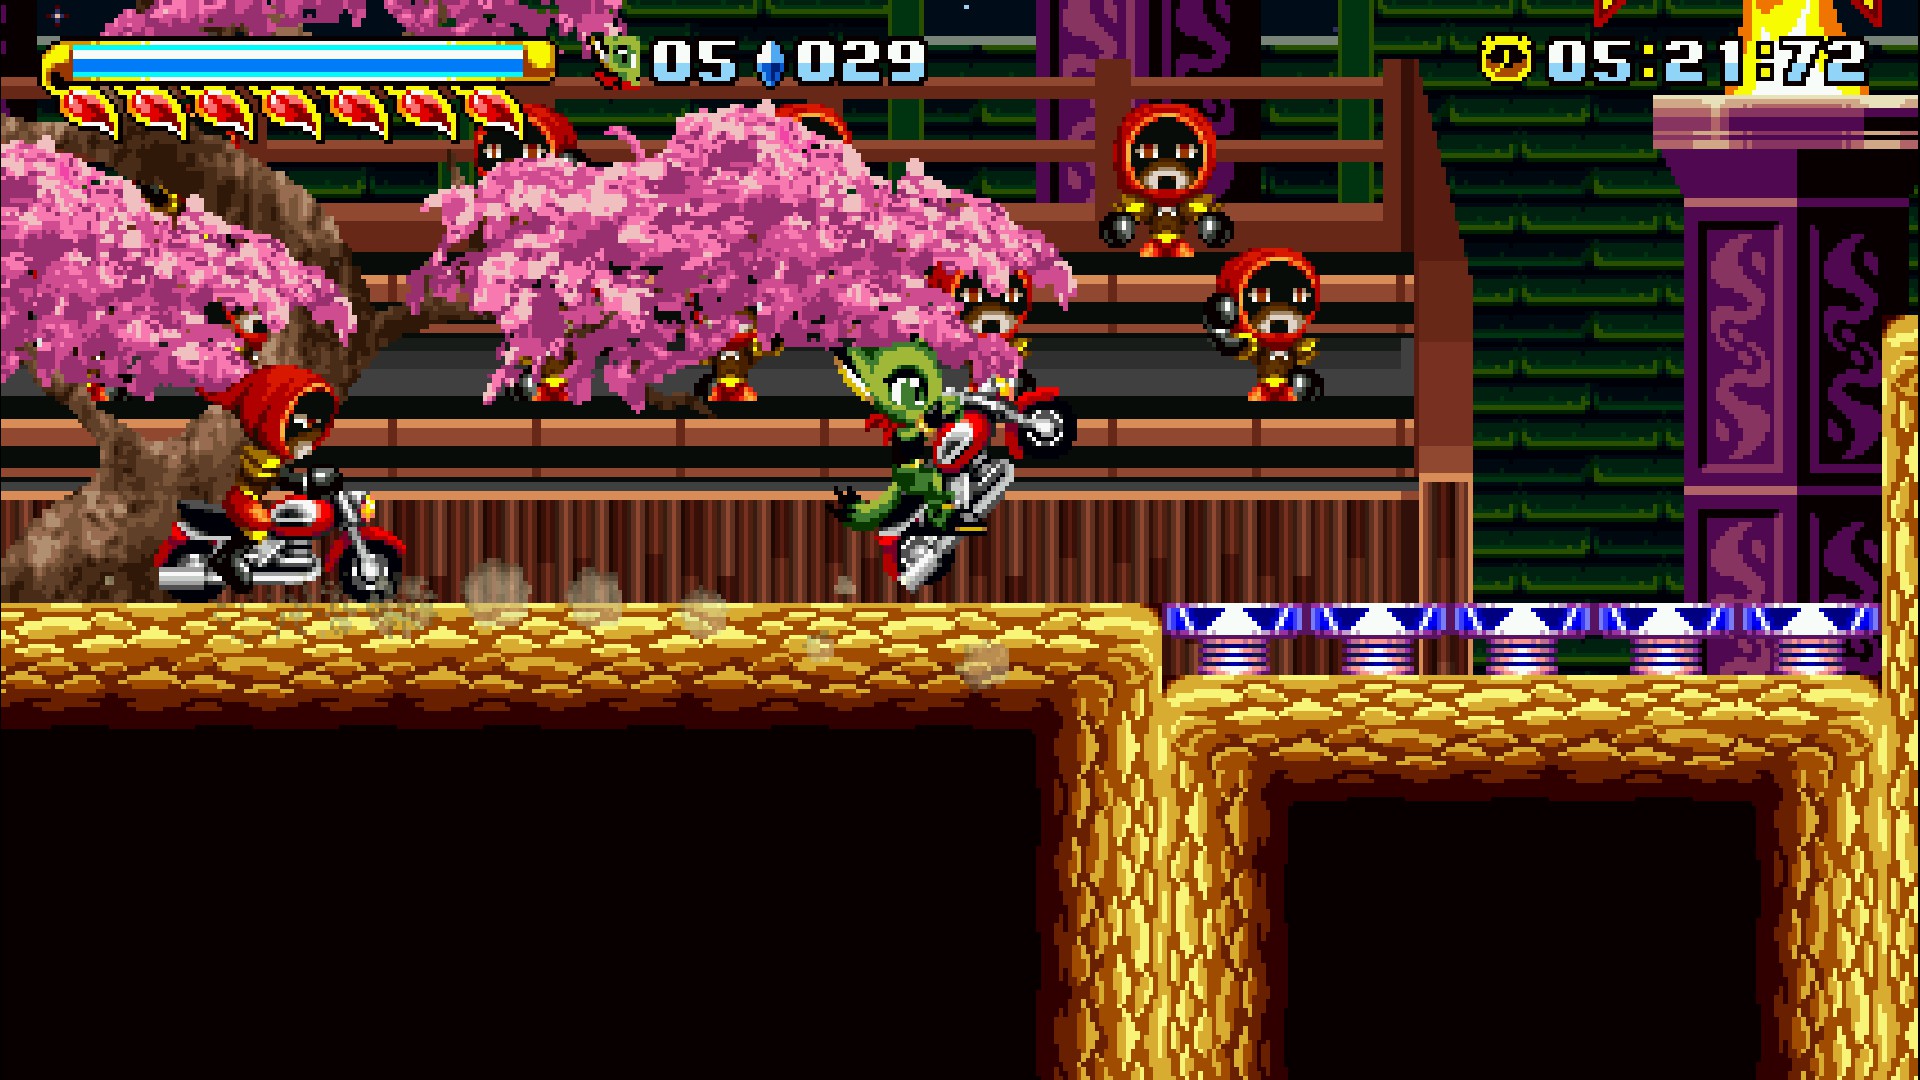 download steam freedom planet for free